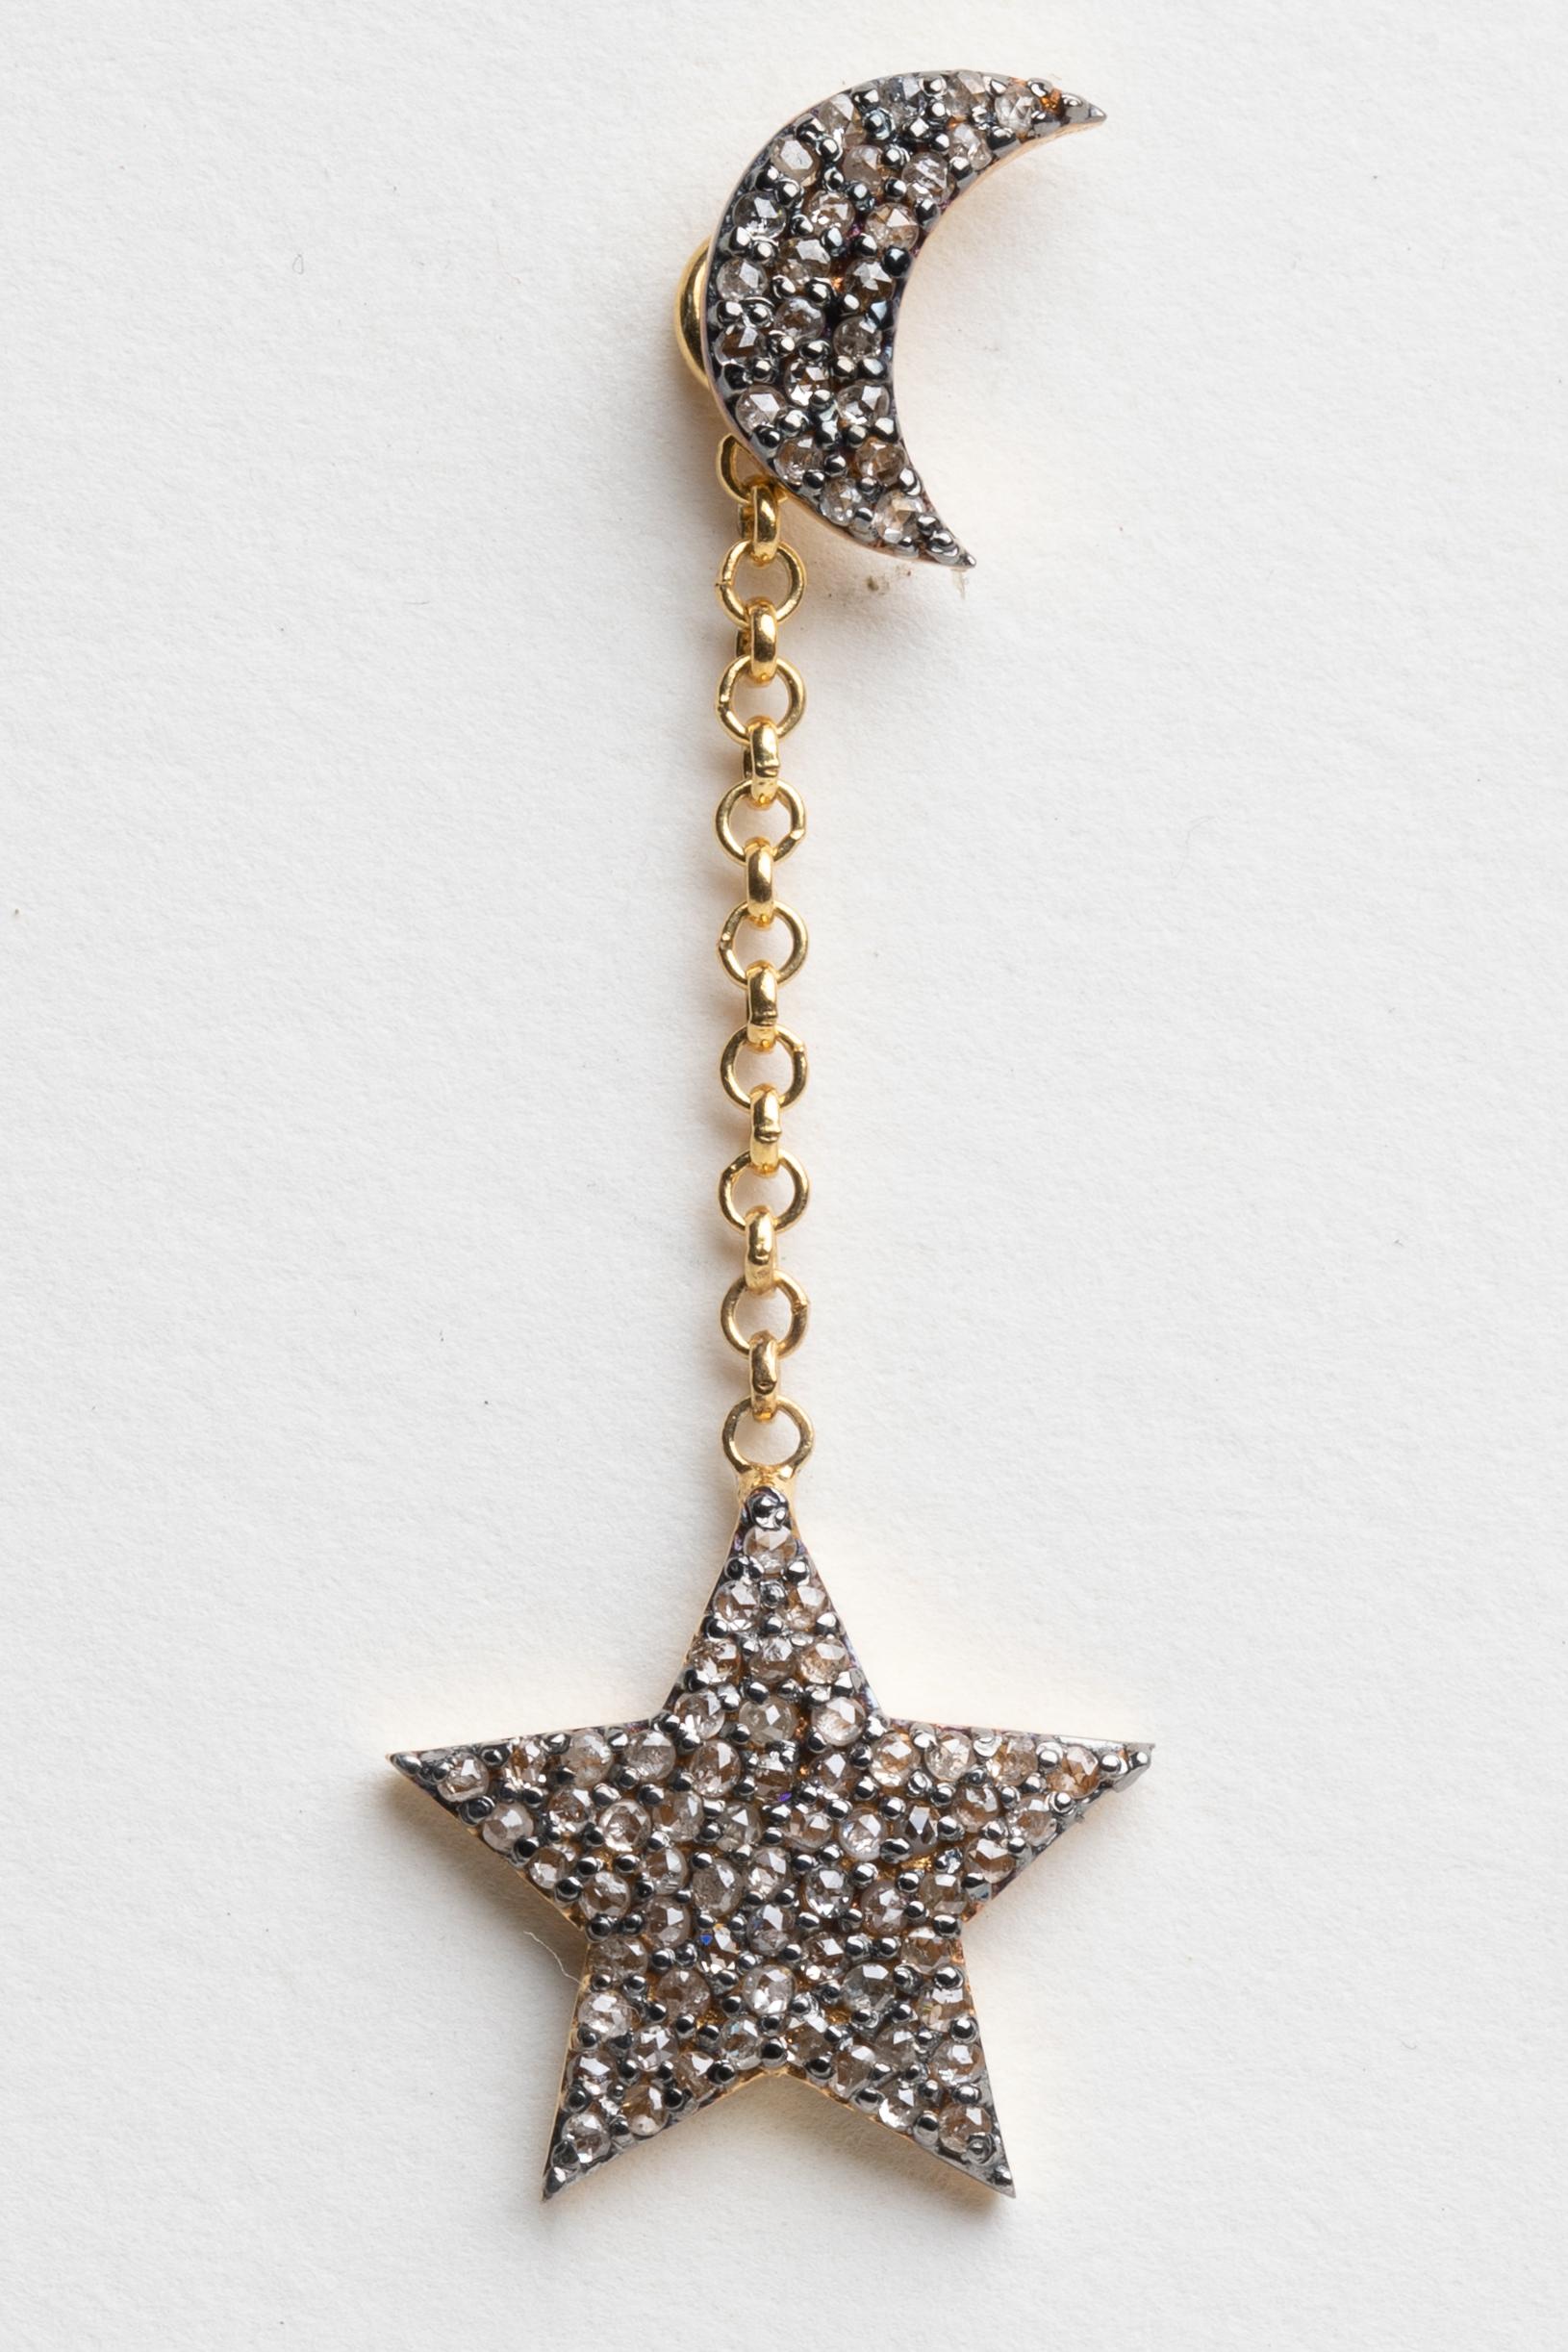 A pair of dangle earrings with round brilliant cut diamond crescent moons as the post and diamond stars dangling from a gold chain.  18K gold post for pierced ears.  The chain with the star can be removed if you just wanted to wear the studs.